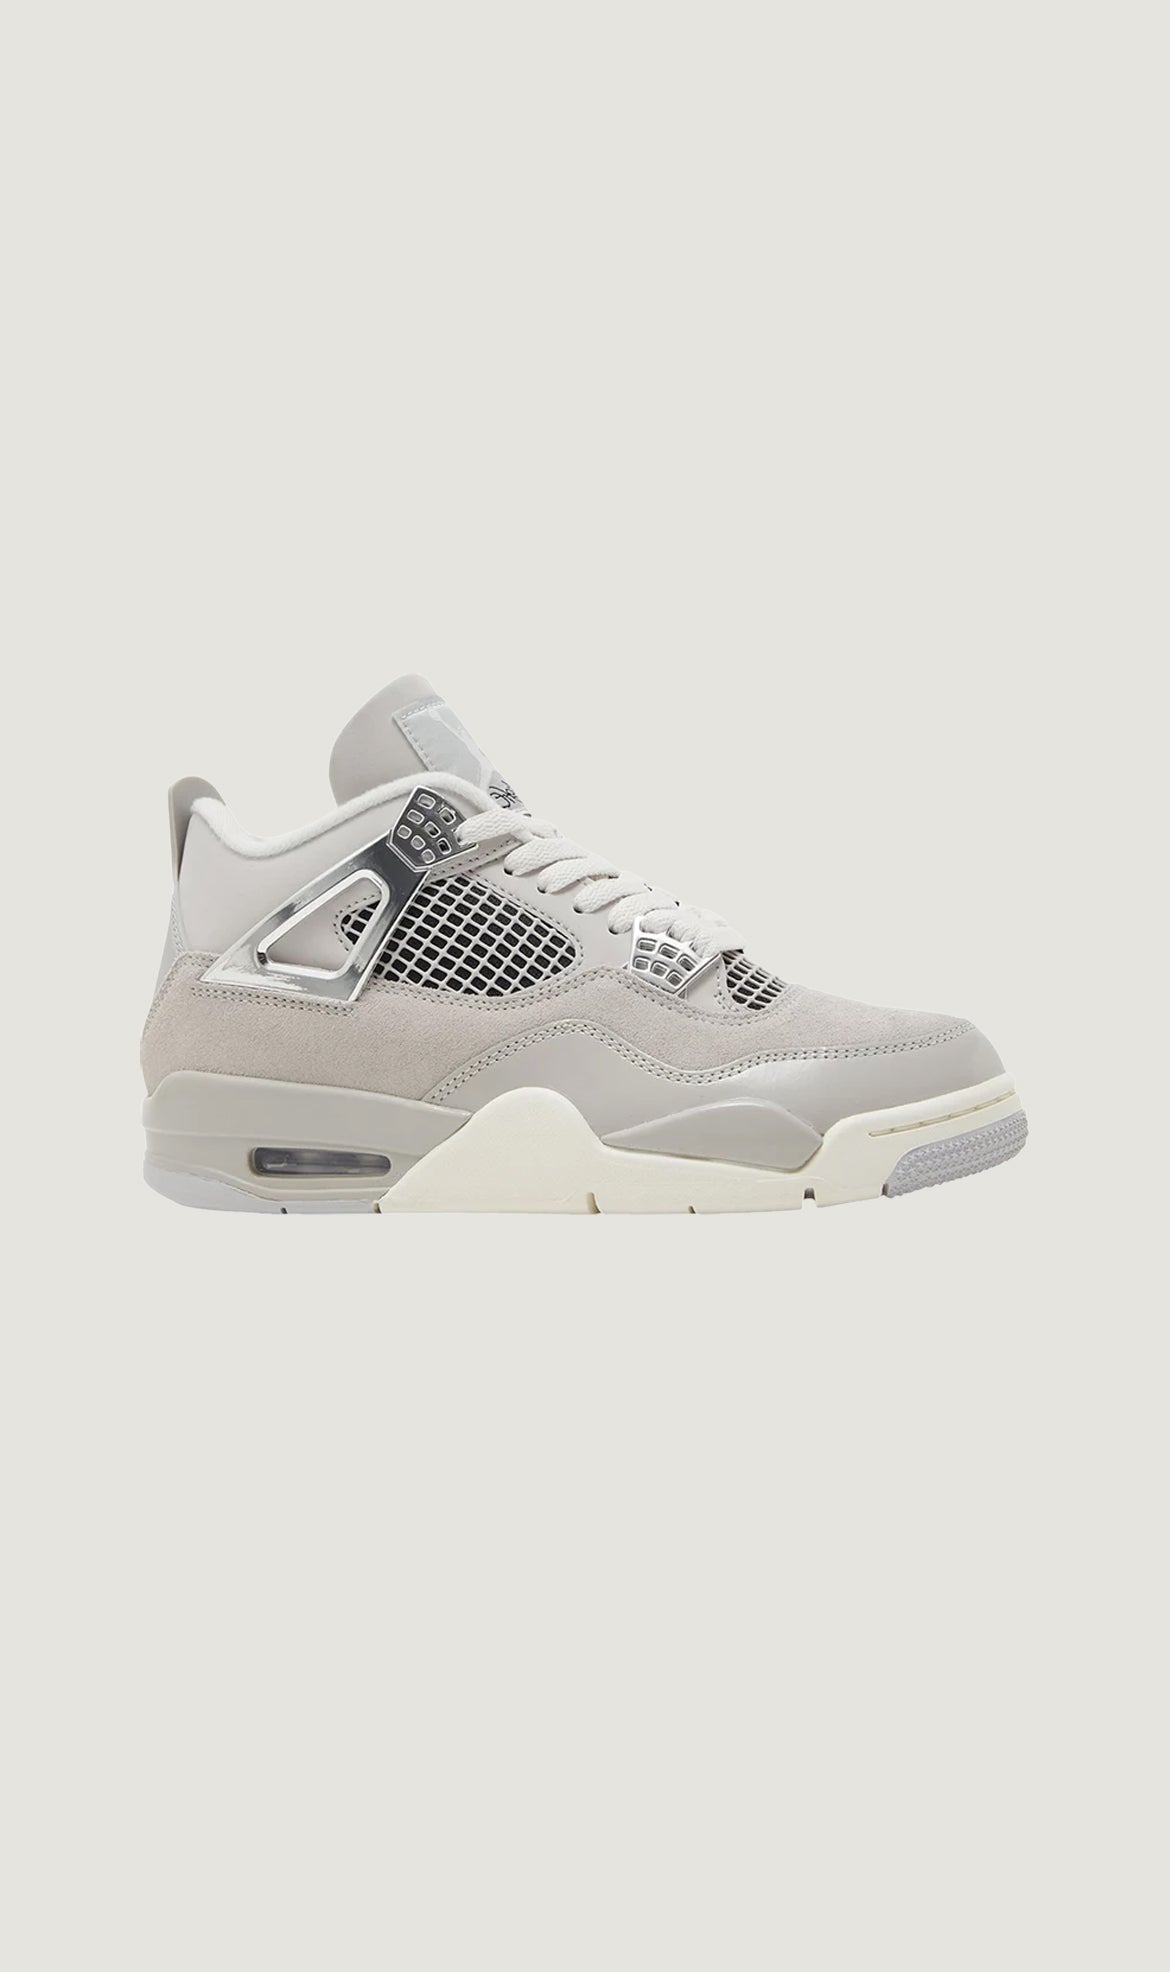 Load image into Gallery viewer, WMNS AIR JORDAN 4 RETRO - FROZEN MOMENTS
